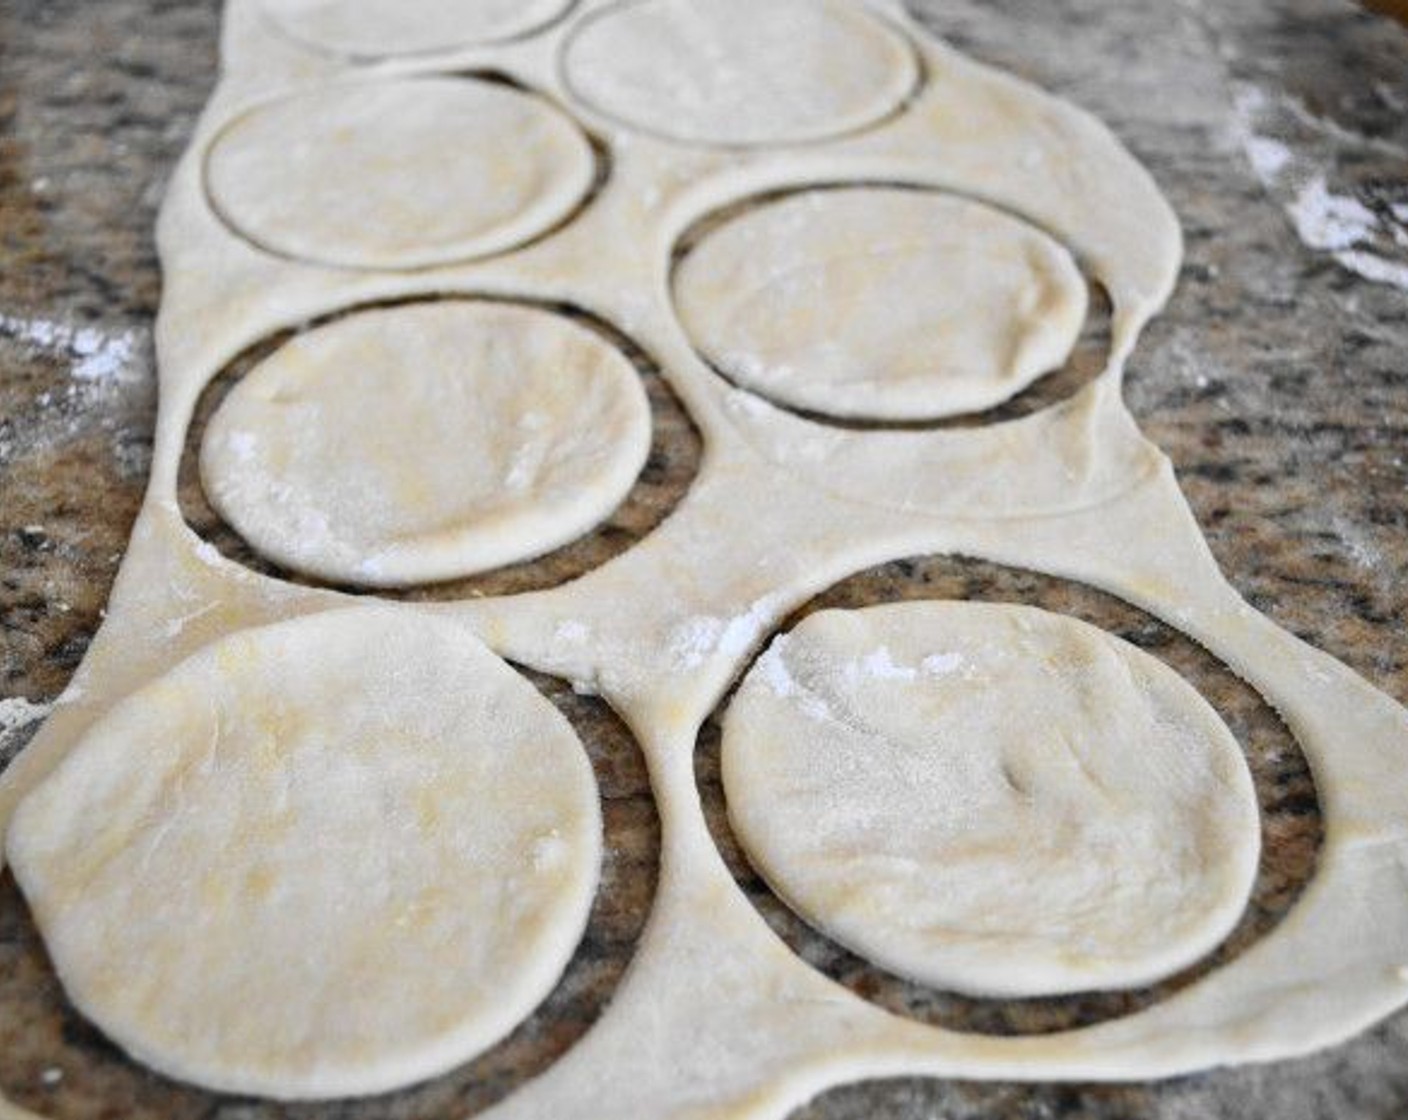 step 5 When the dough is done resting, divide it in half. Roll out the first half to about 1/4 inch thick on a floured surface with a floured rolling pin. With a 4 inch round cutter, cut out perfect little circles. You should get nine circles the first time.